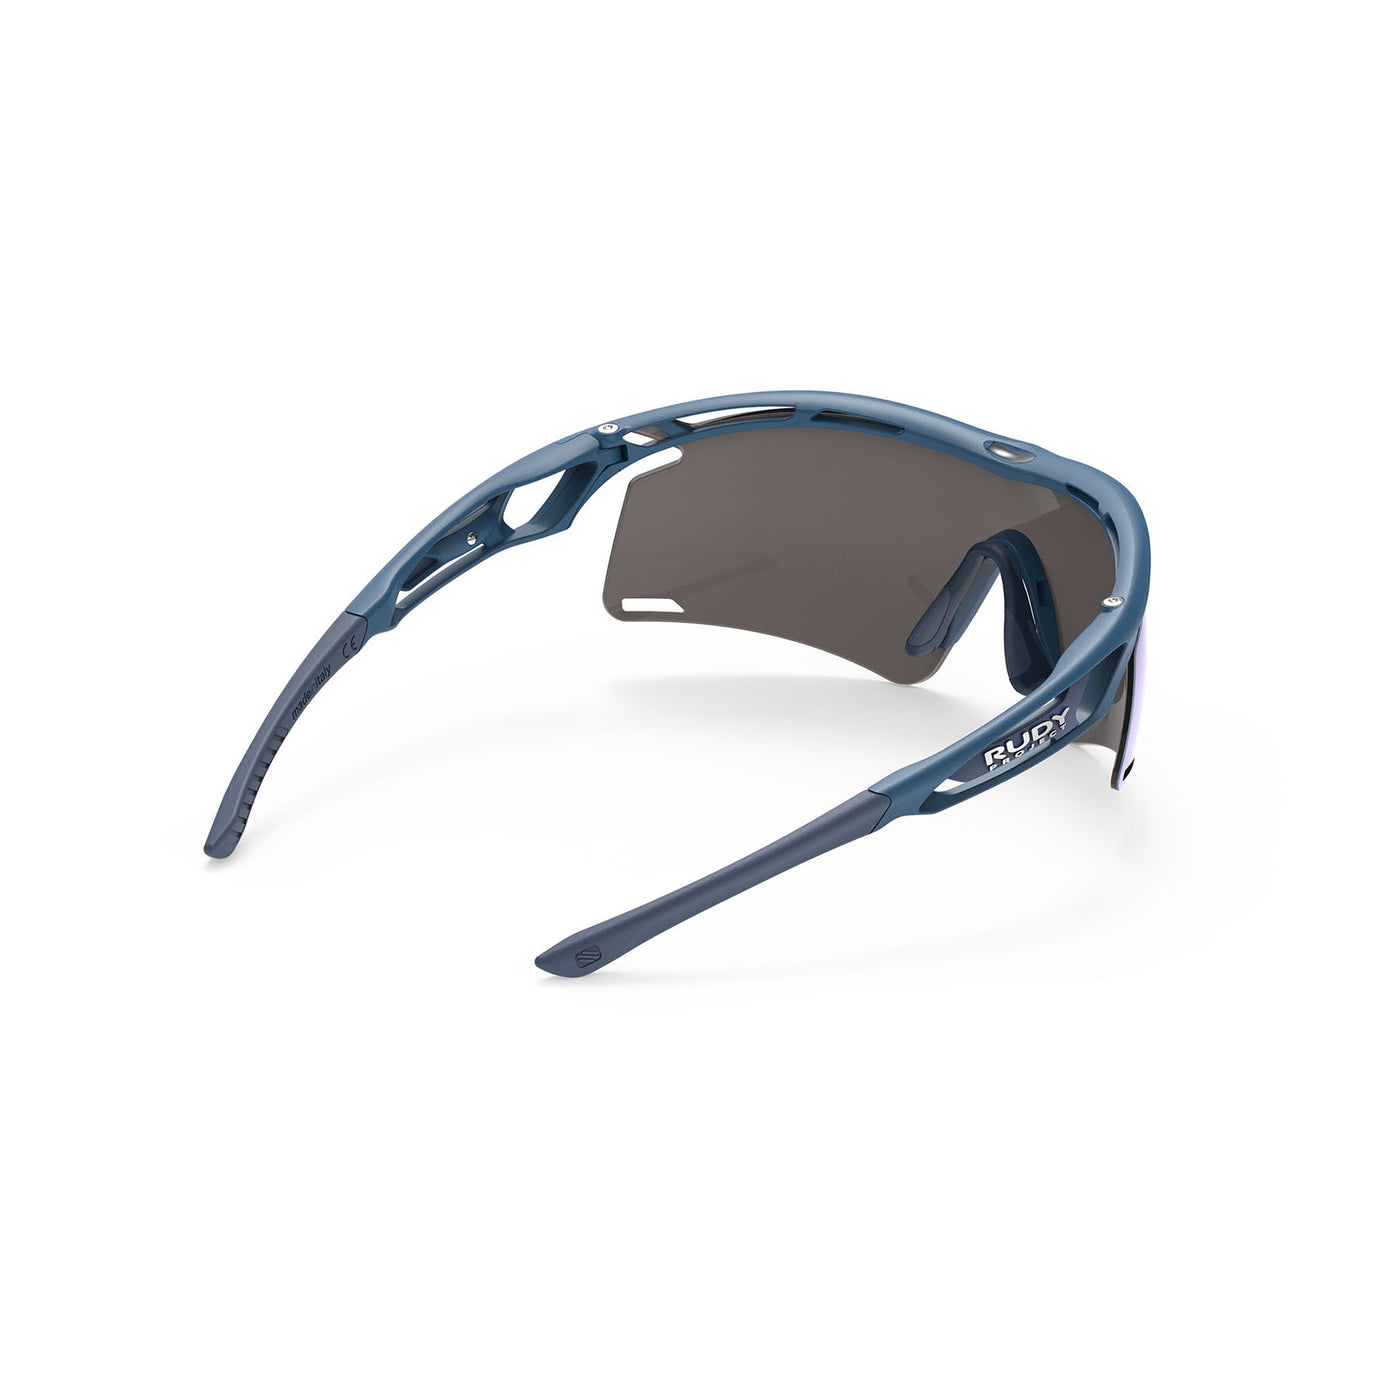 Rudy Project Tralyx running and cycling sport shield prescription sunglasses#color_tralyx-plus-pacific-blue-matte-frame-with-multilaser-ice-lenses